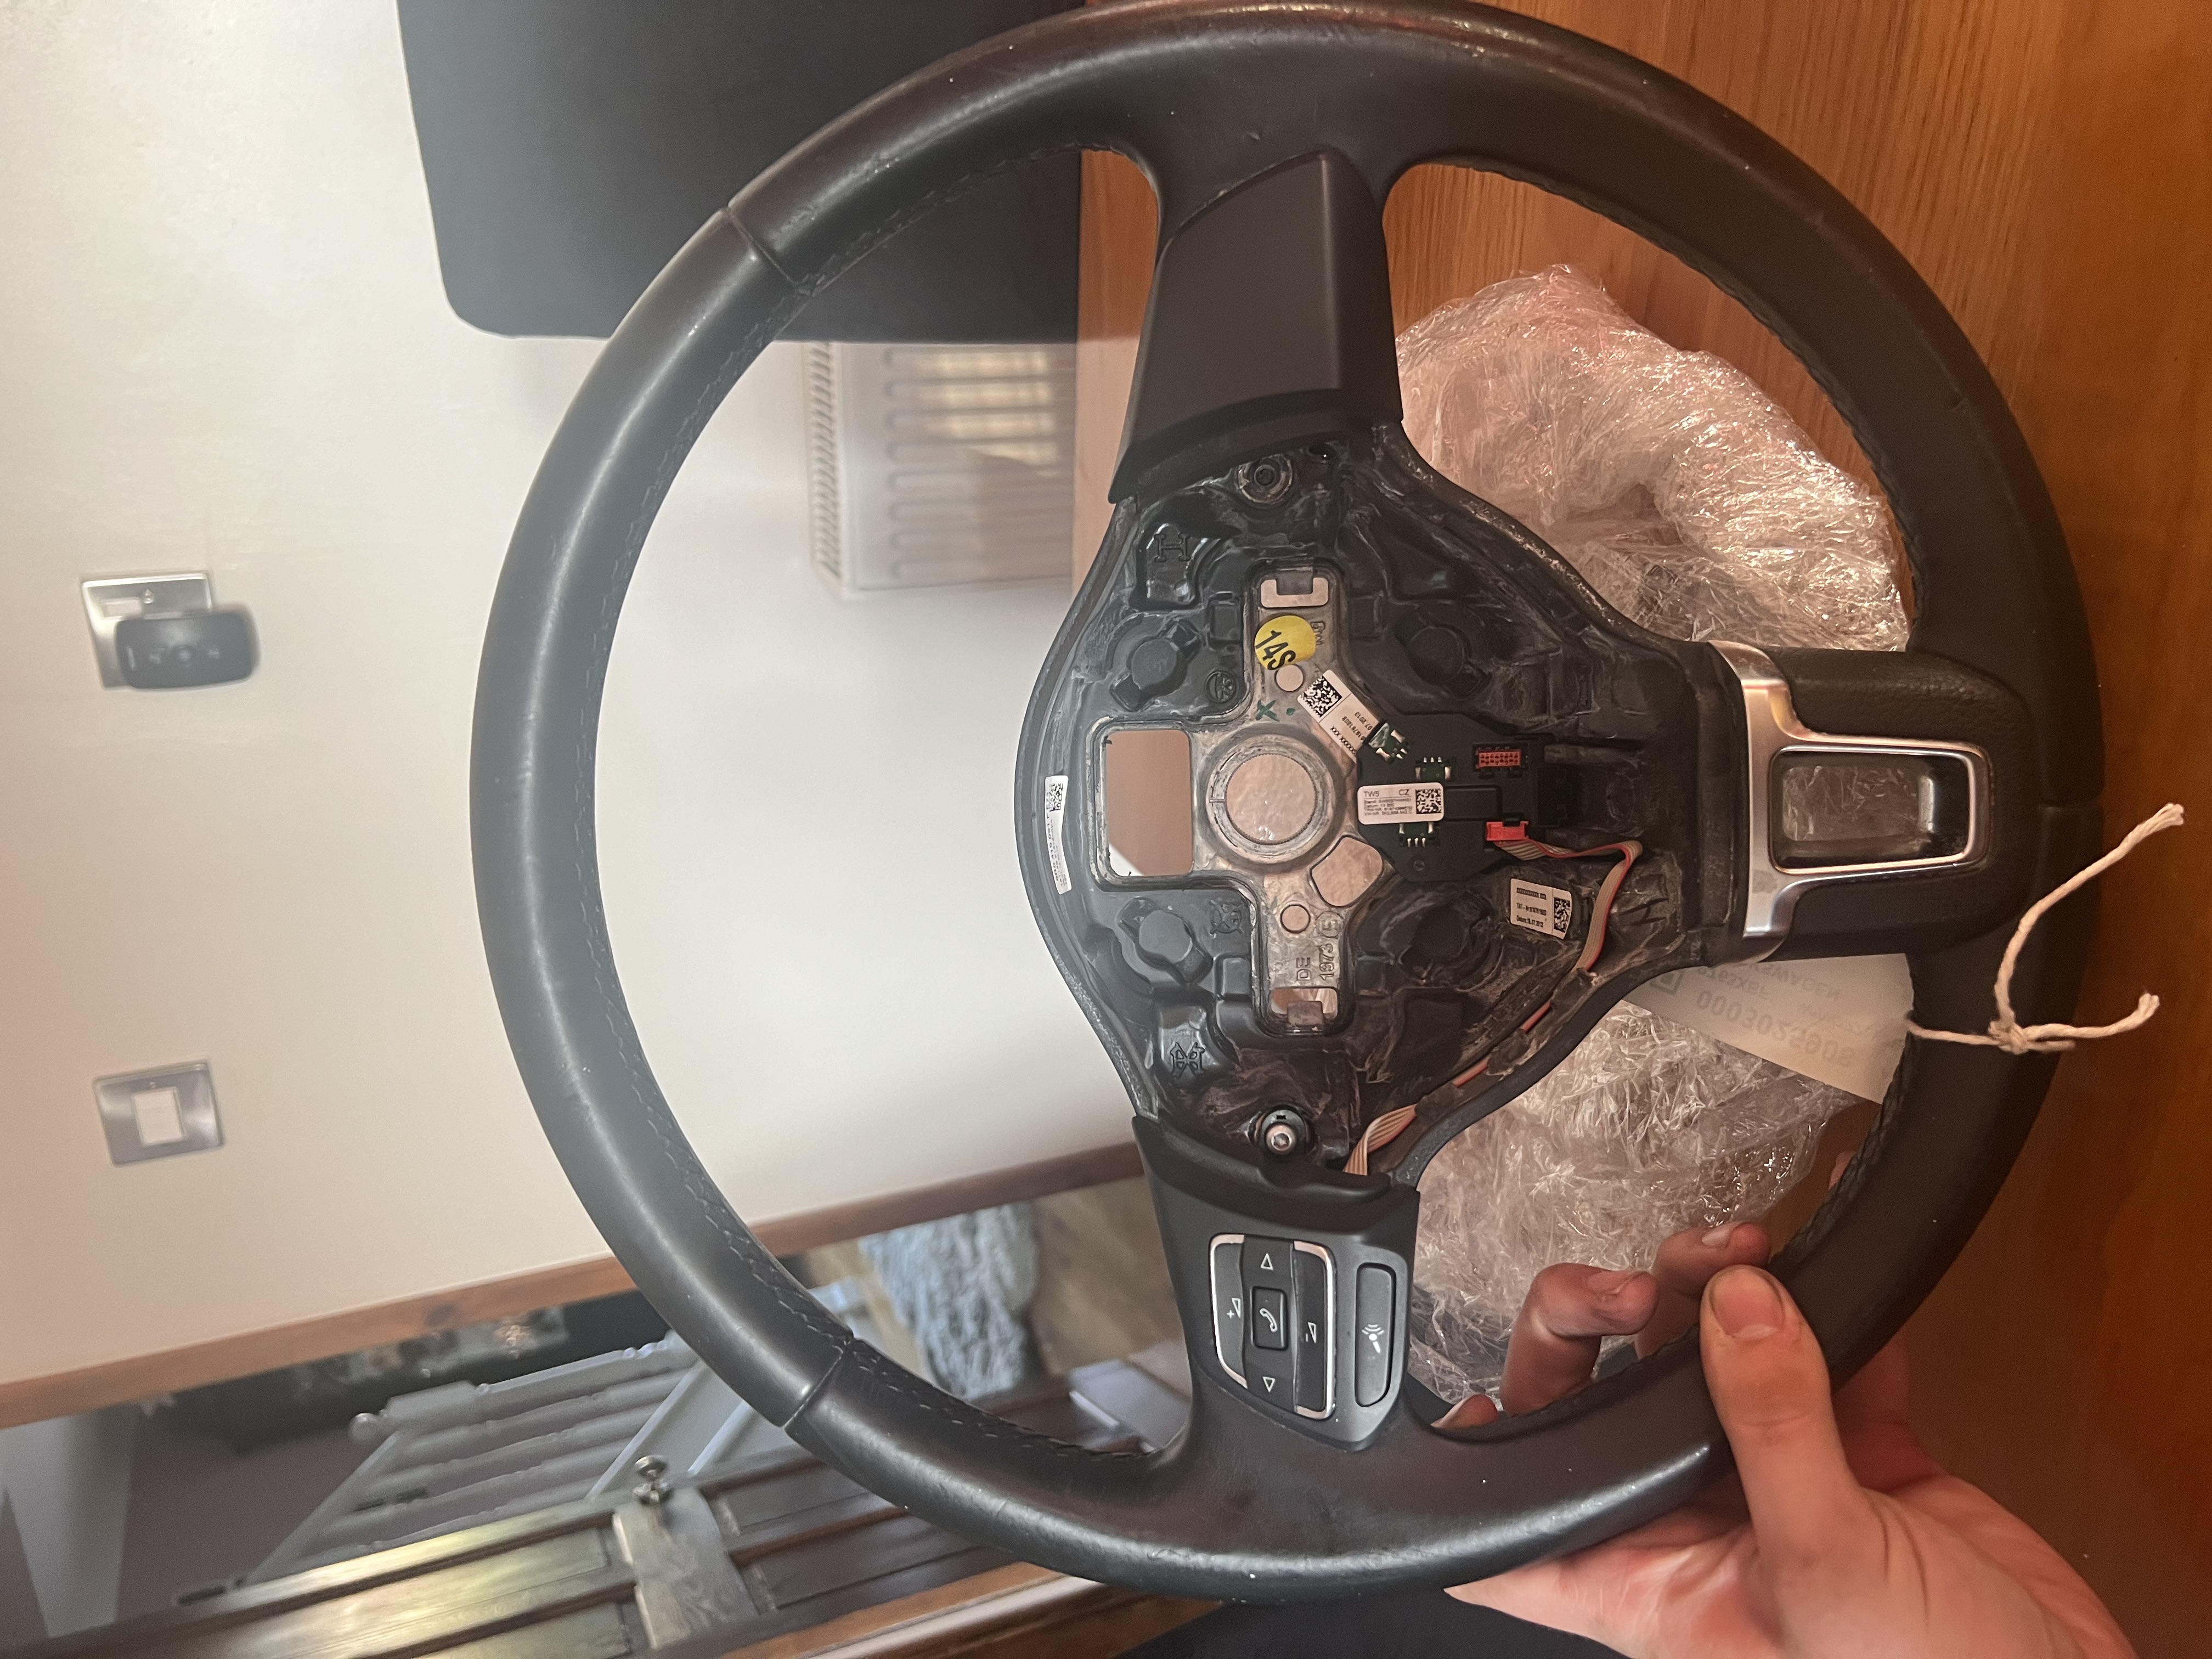 This is the wheel I have purchased and would like to fit